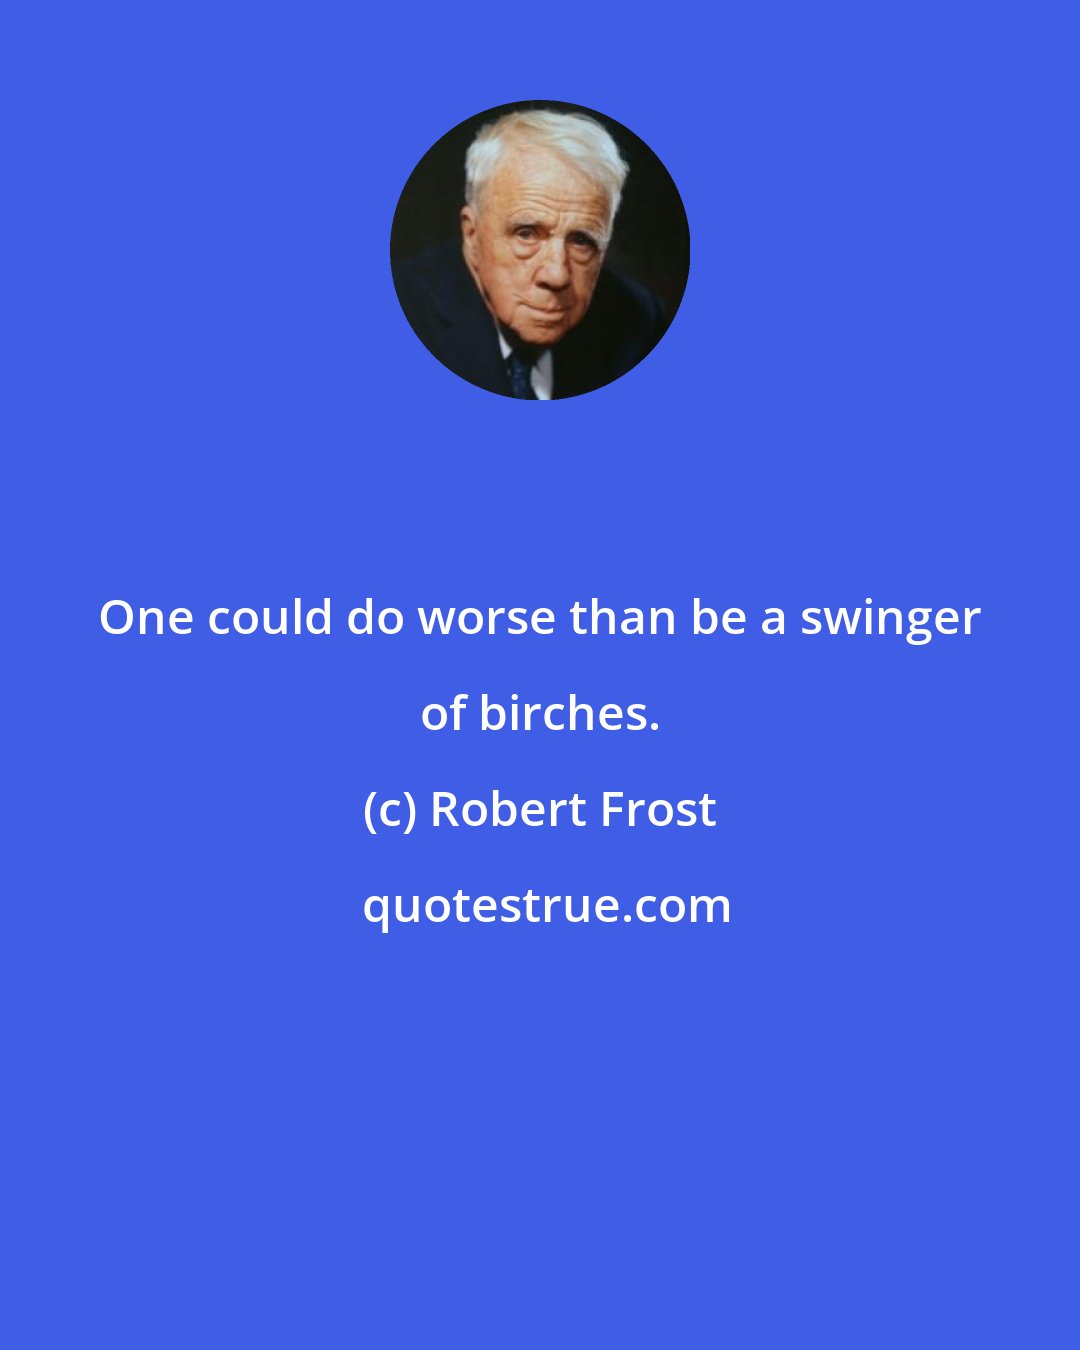 Robert Frost: One could do worse than be a swinger of birches.